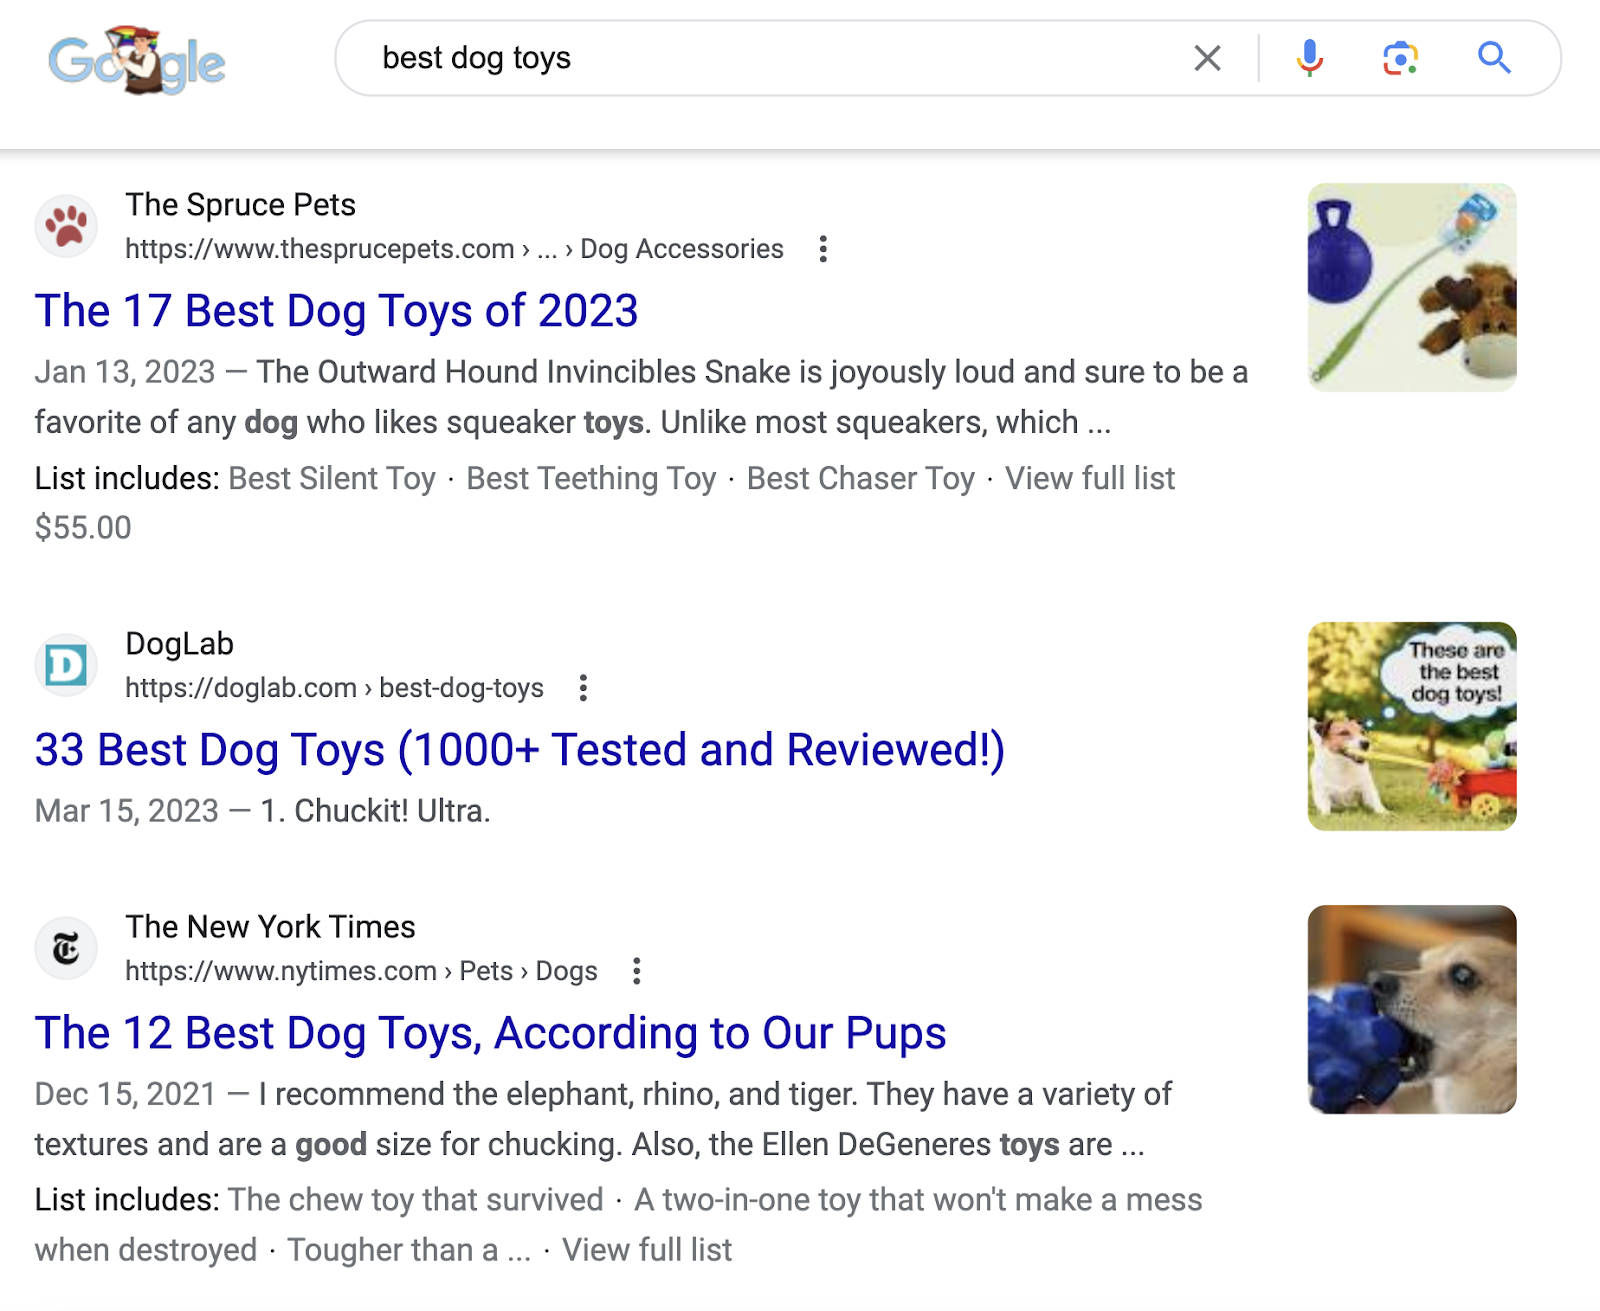 Google search results for “best dog toys”